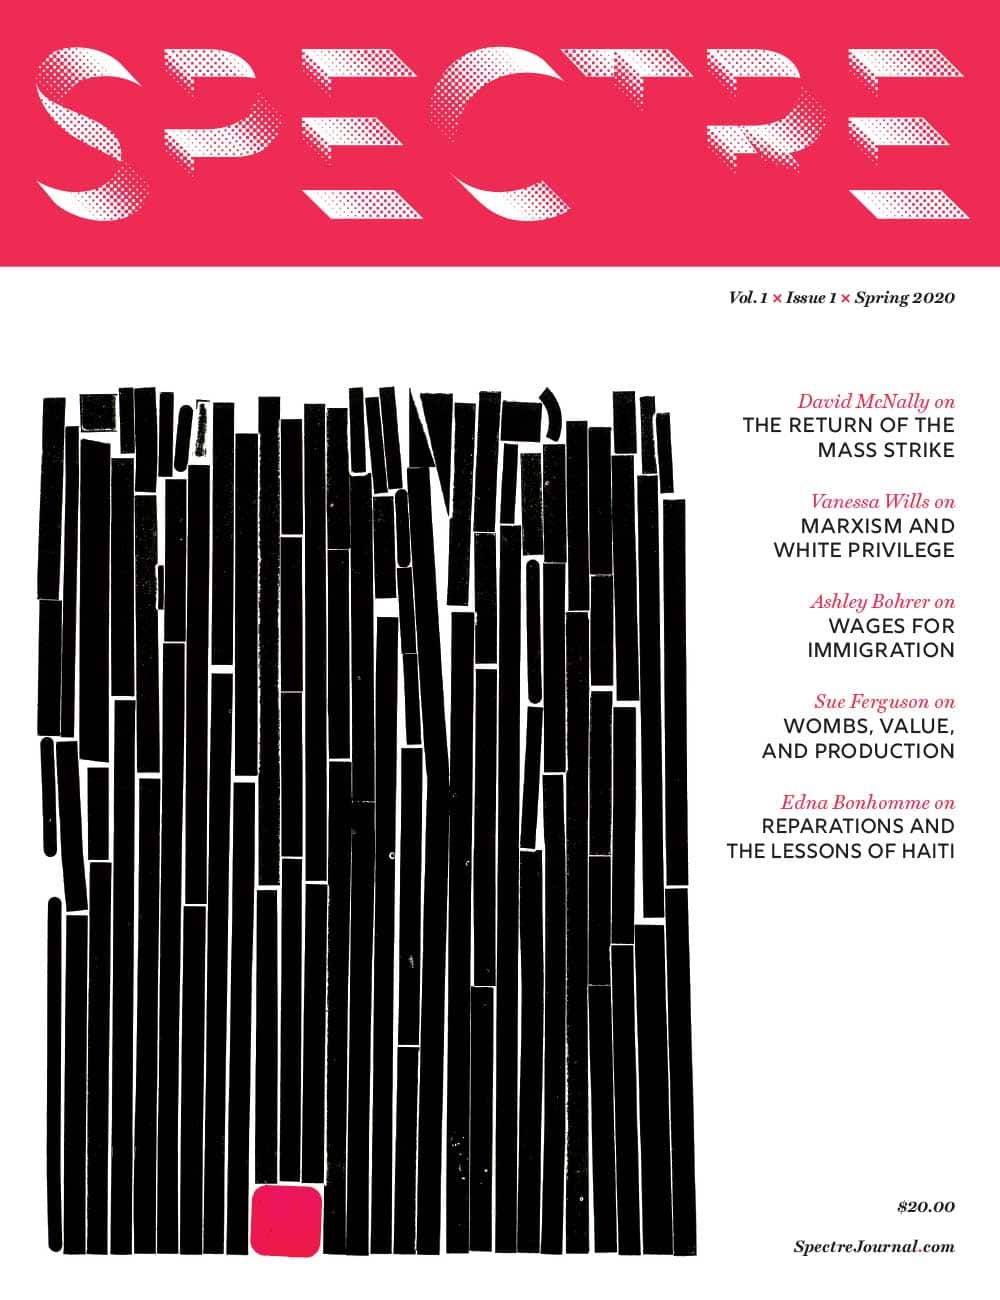 The cover of Spectre's first issue, featuring art by Aaron Gemmill: An abstract visual with vertical black bars in slightly irregular shapes, and one single magenta-red square in the bottom right center.